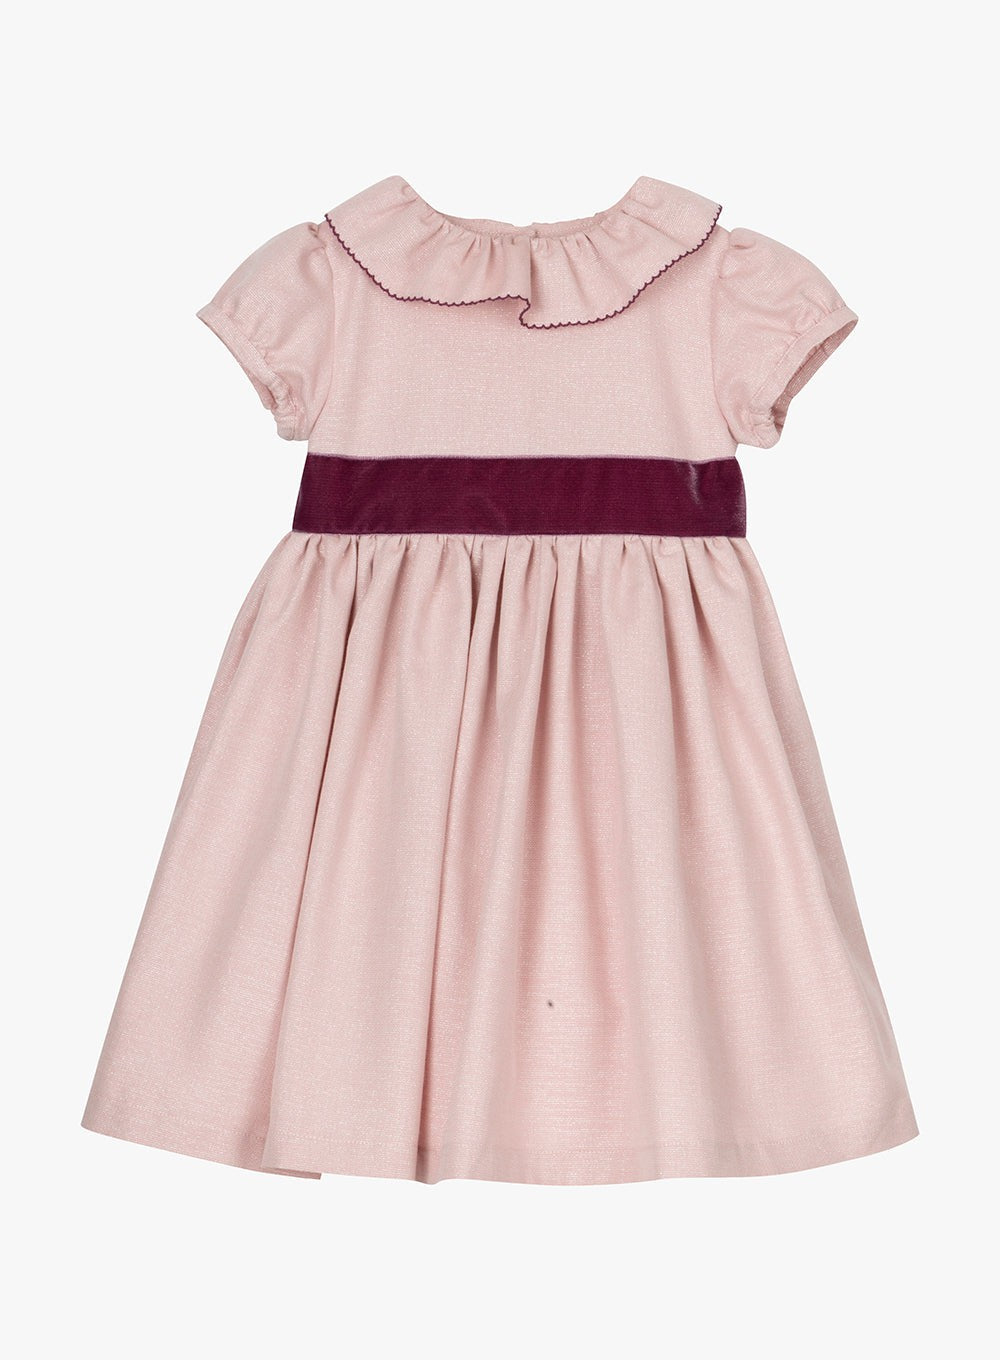 Lily Rose Gold Dress Hetty Willow Dress